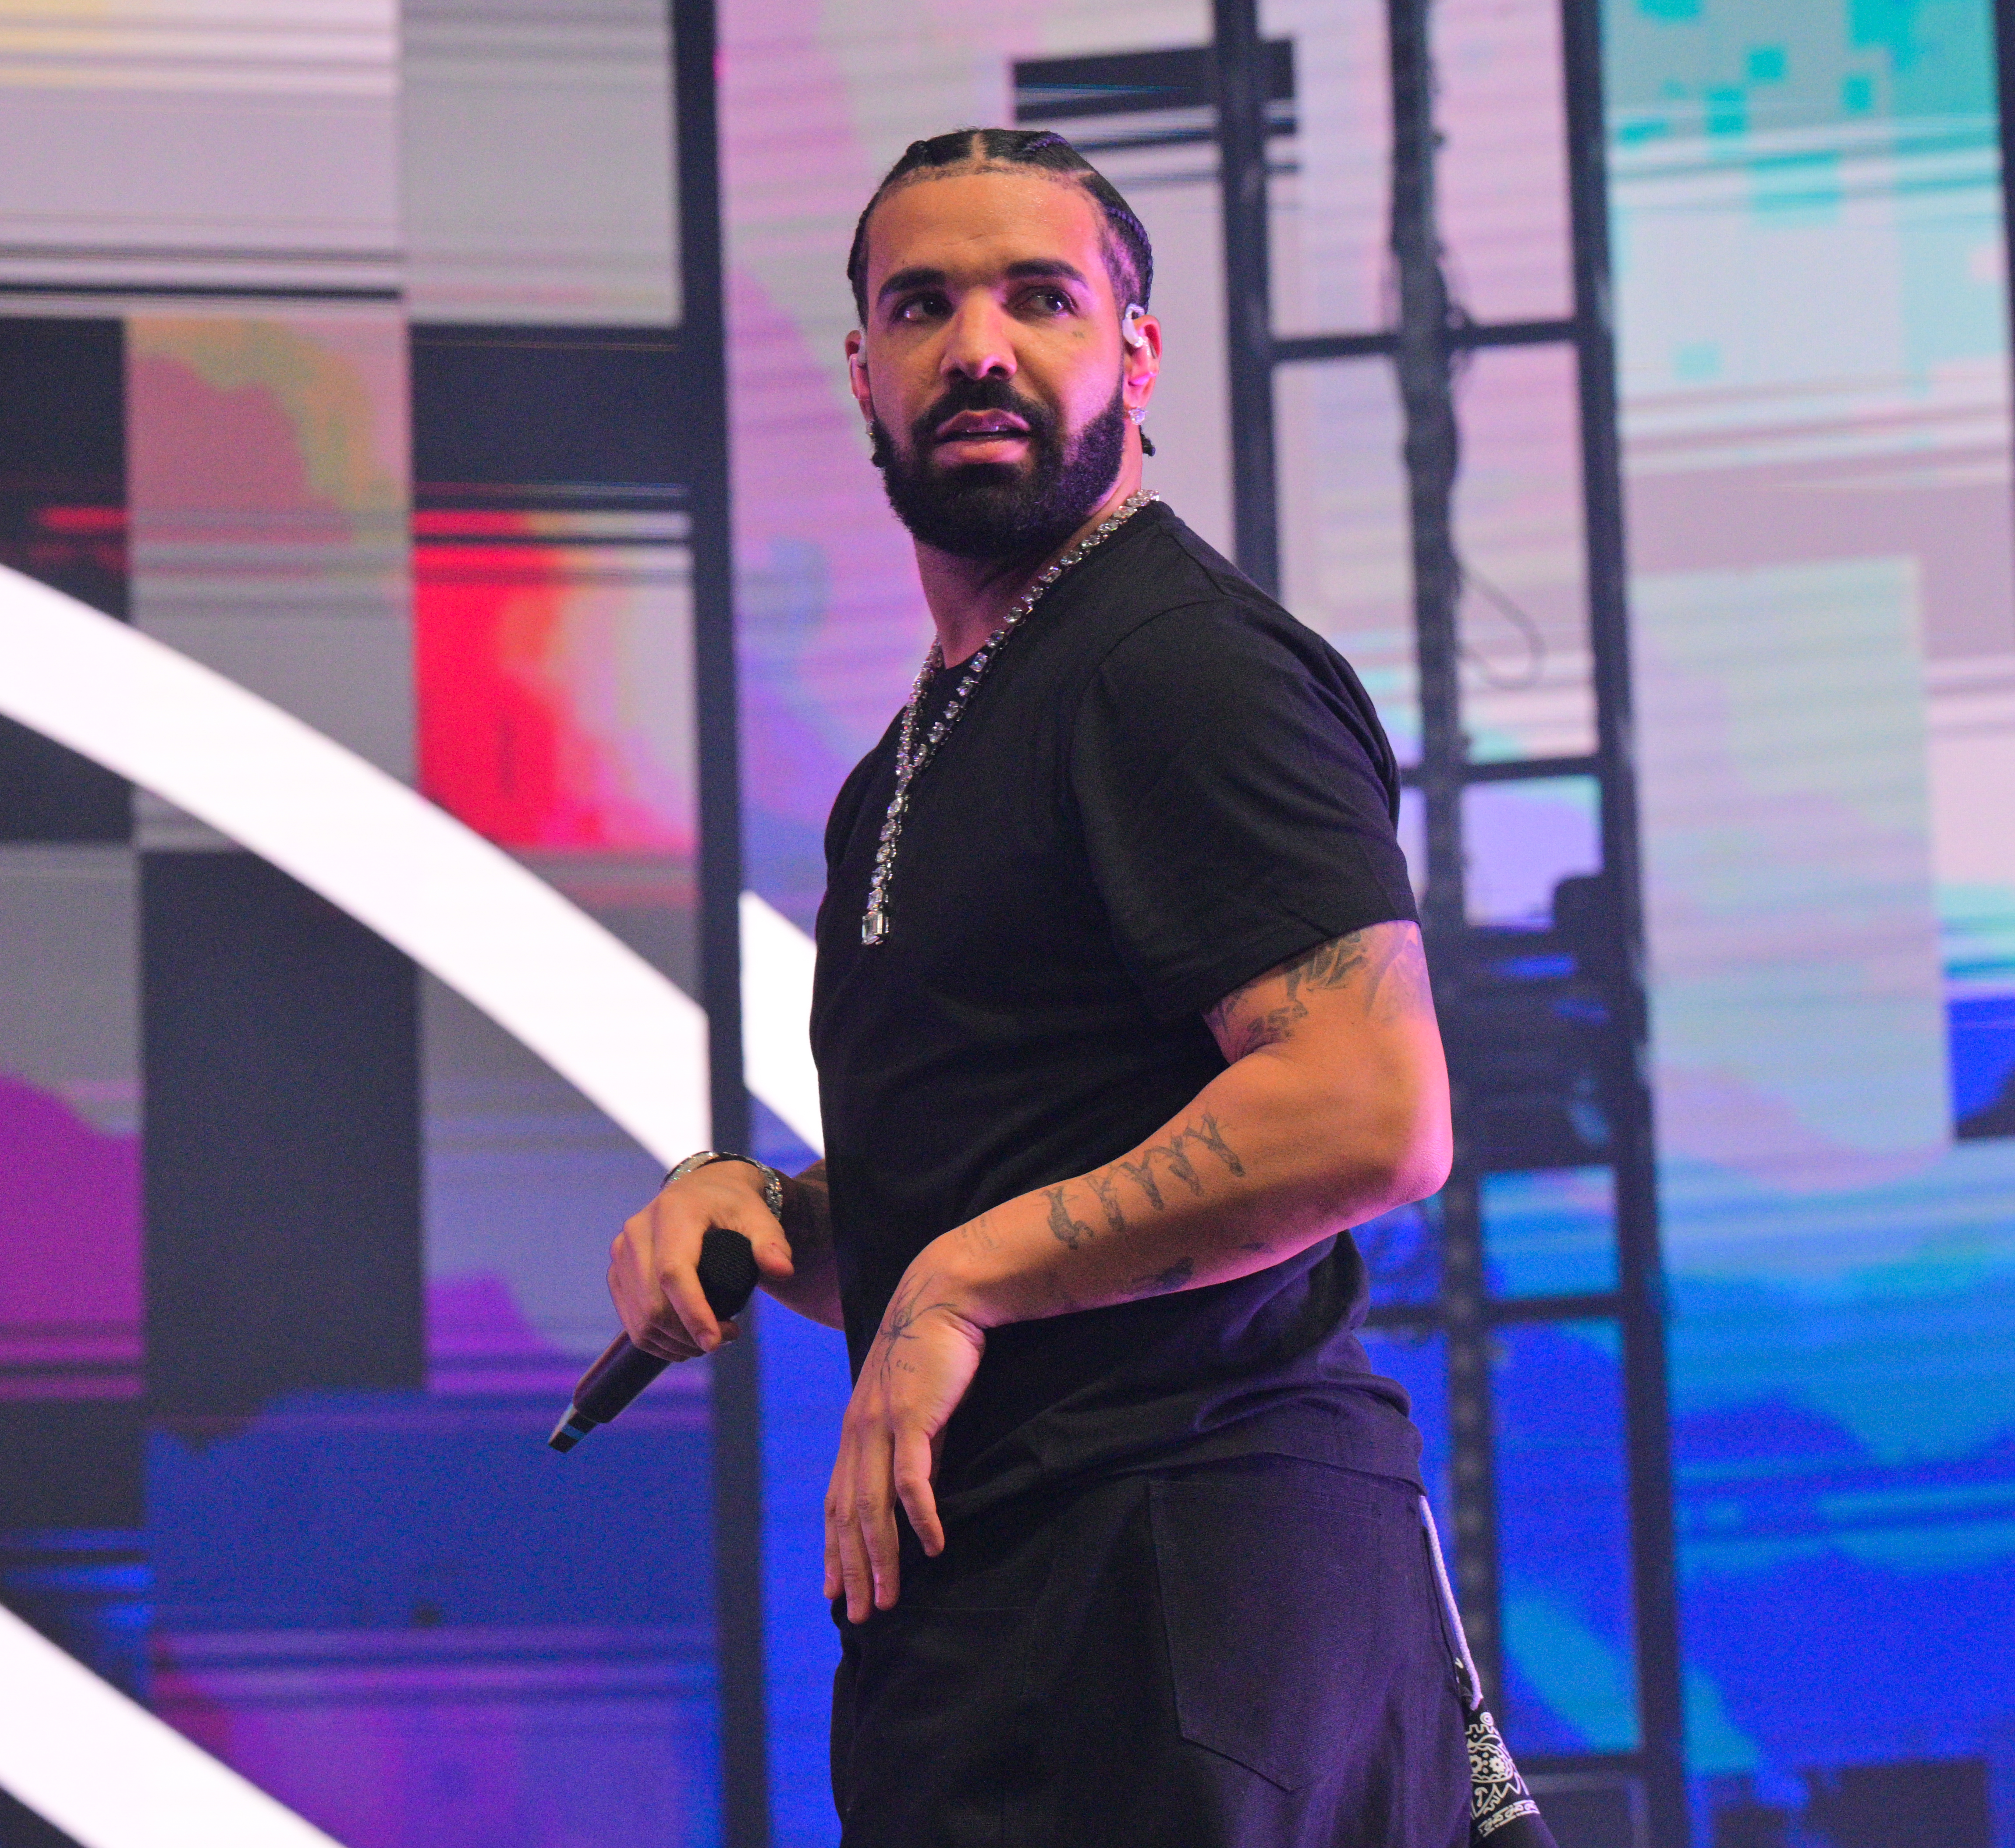 Drake also targeted other rappers in his Push Ups diss track, including Rick Ross as the two have battled it out on social media